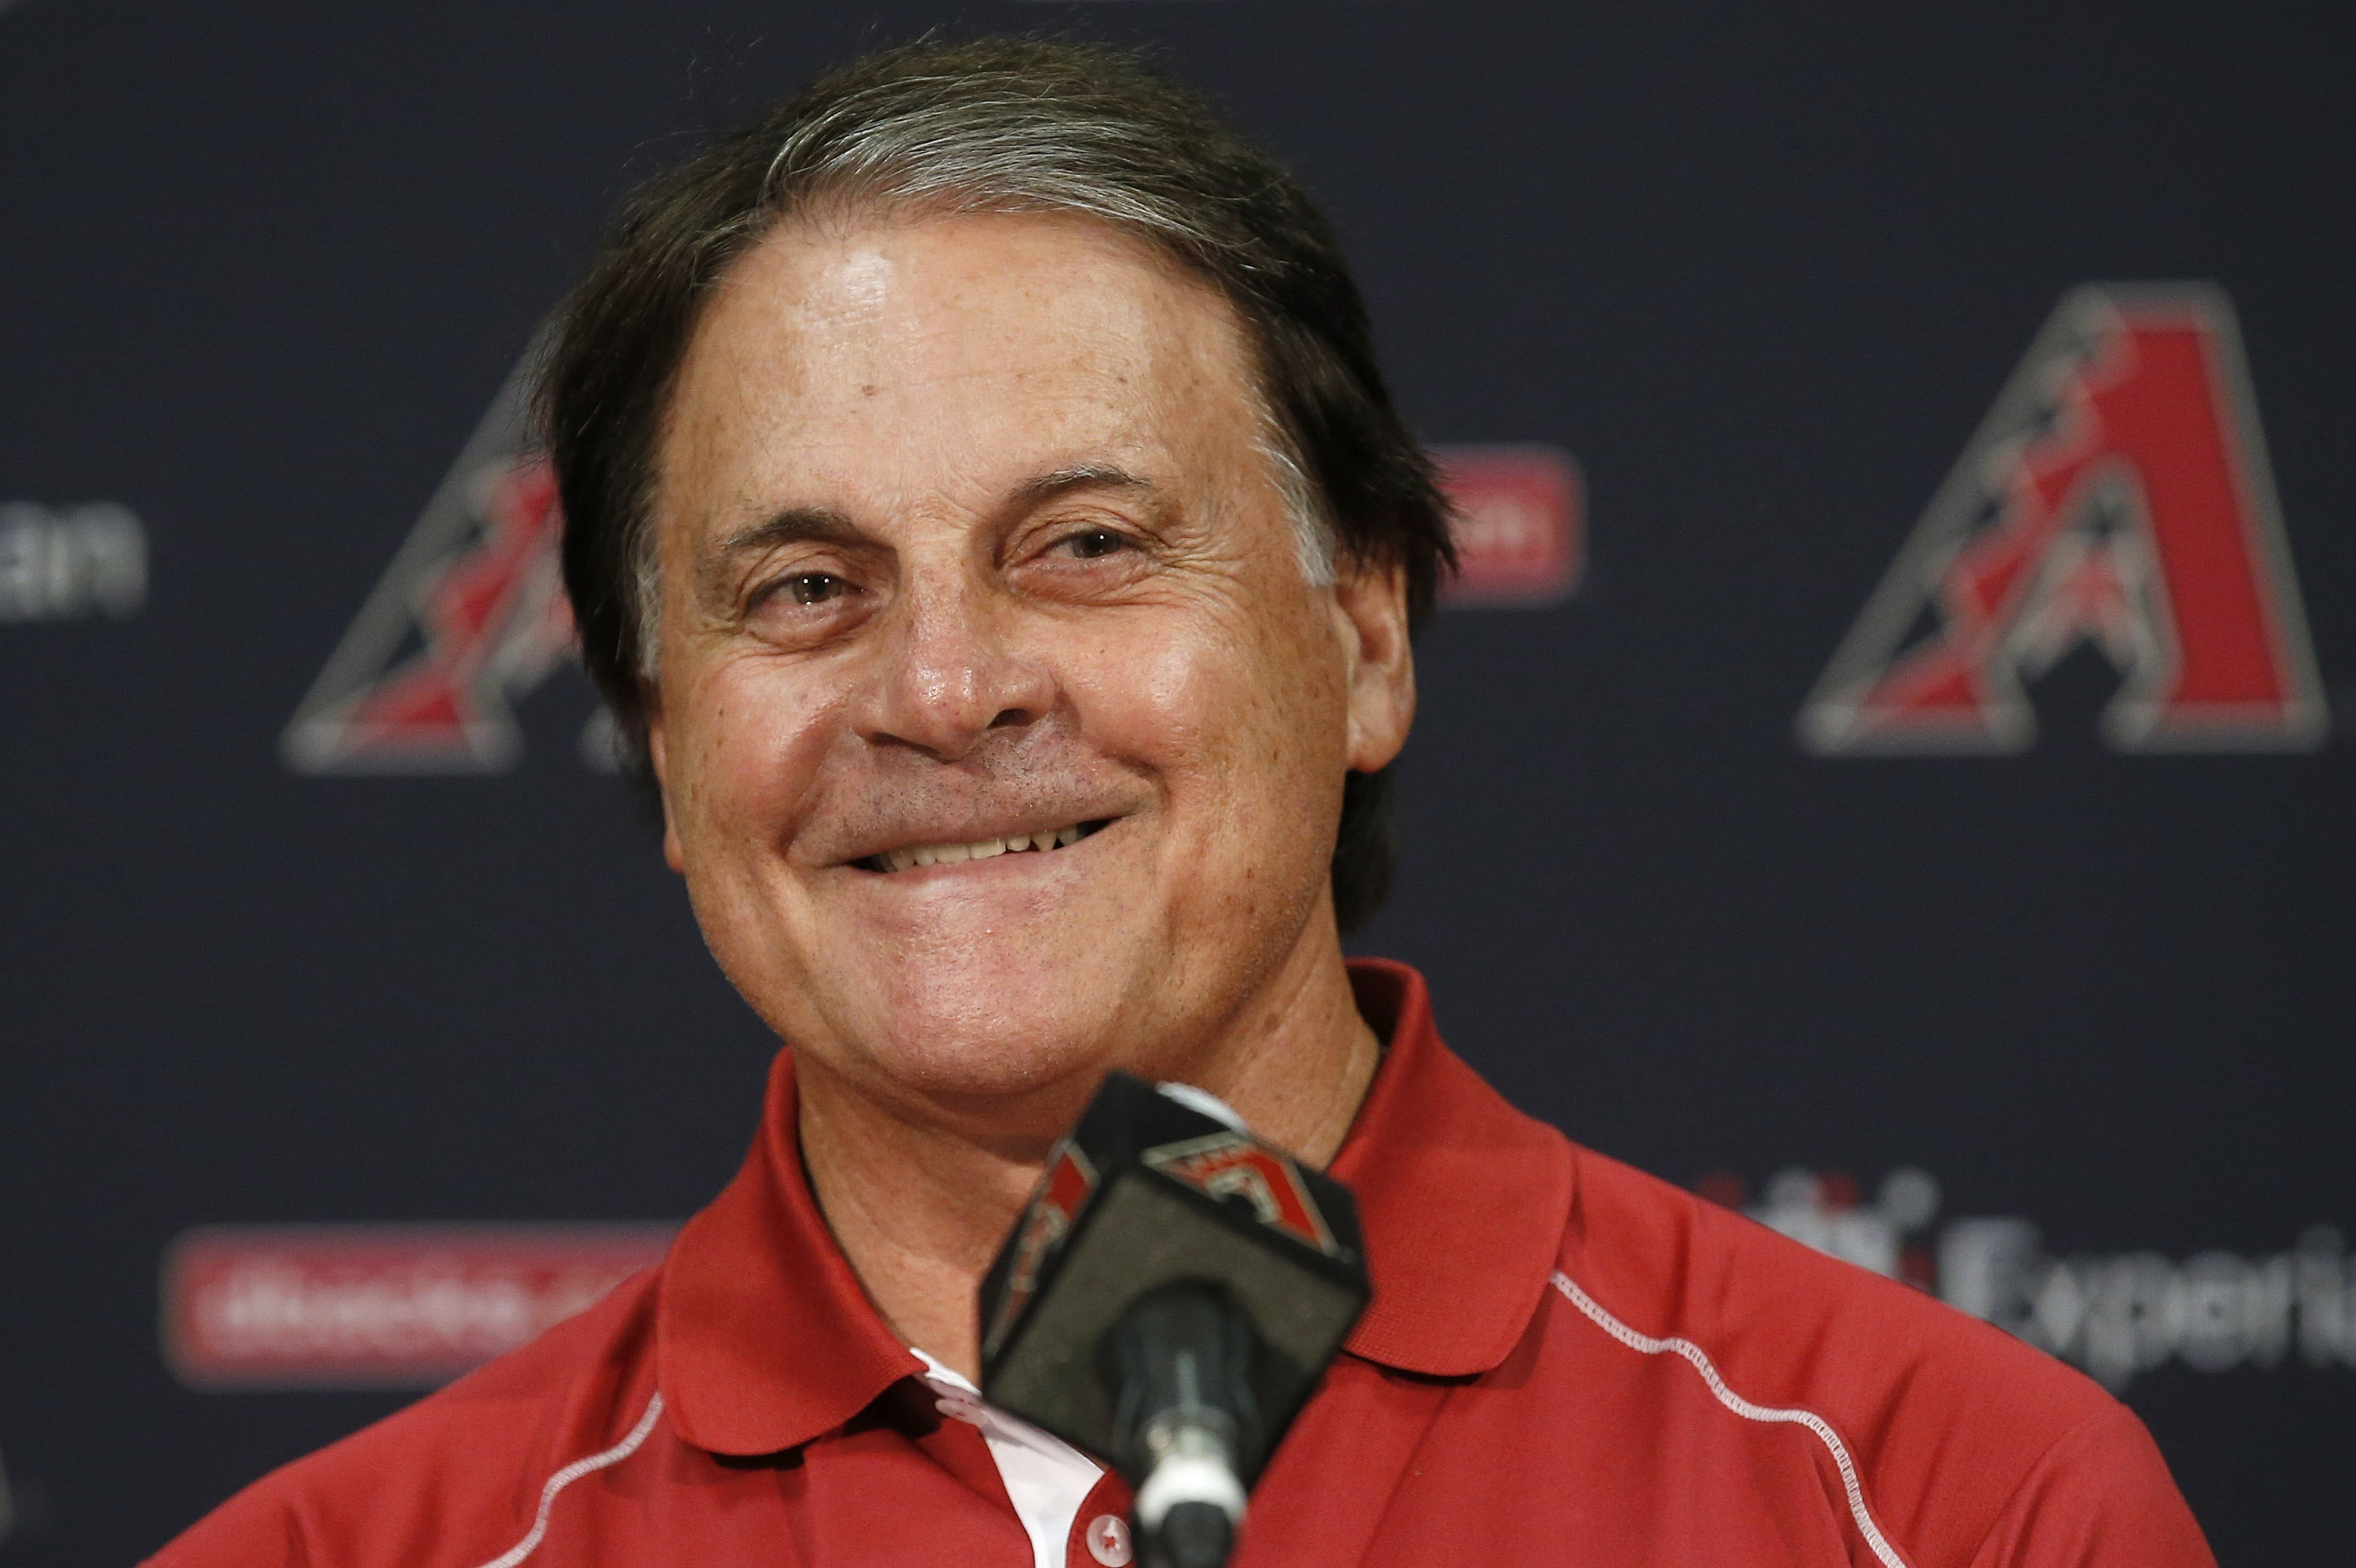 Tony La Russa returns to Chicago White Sox as manager - The Globe and Mail